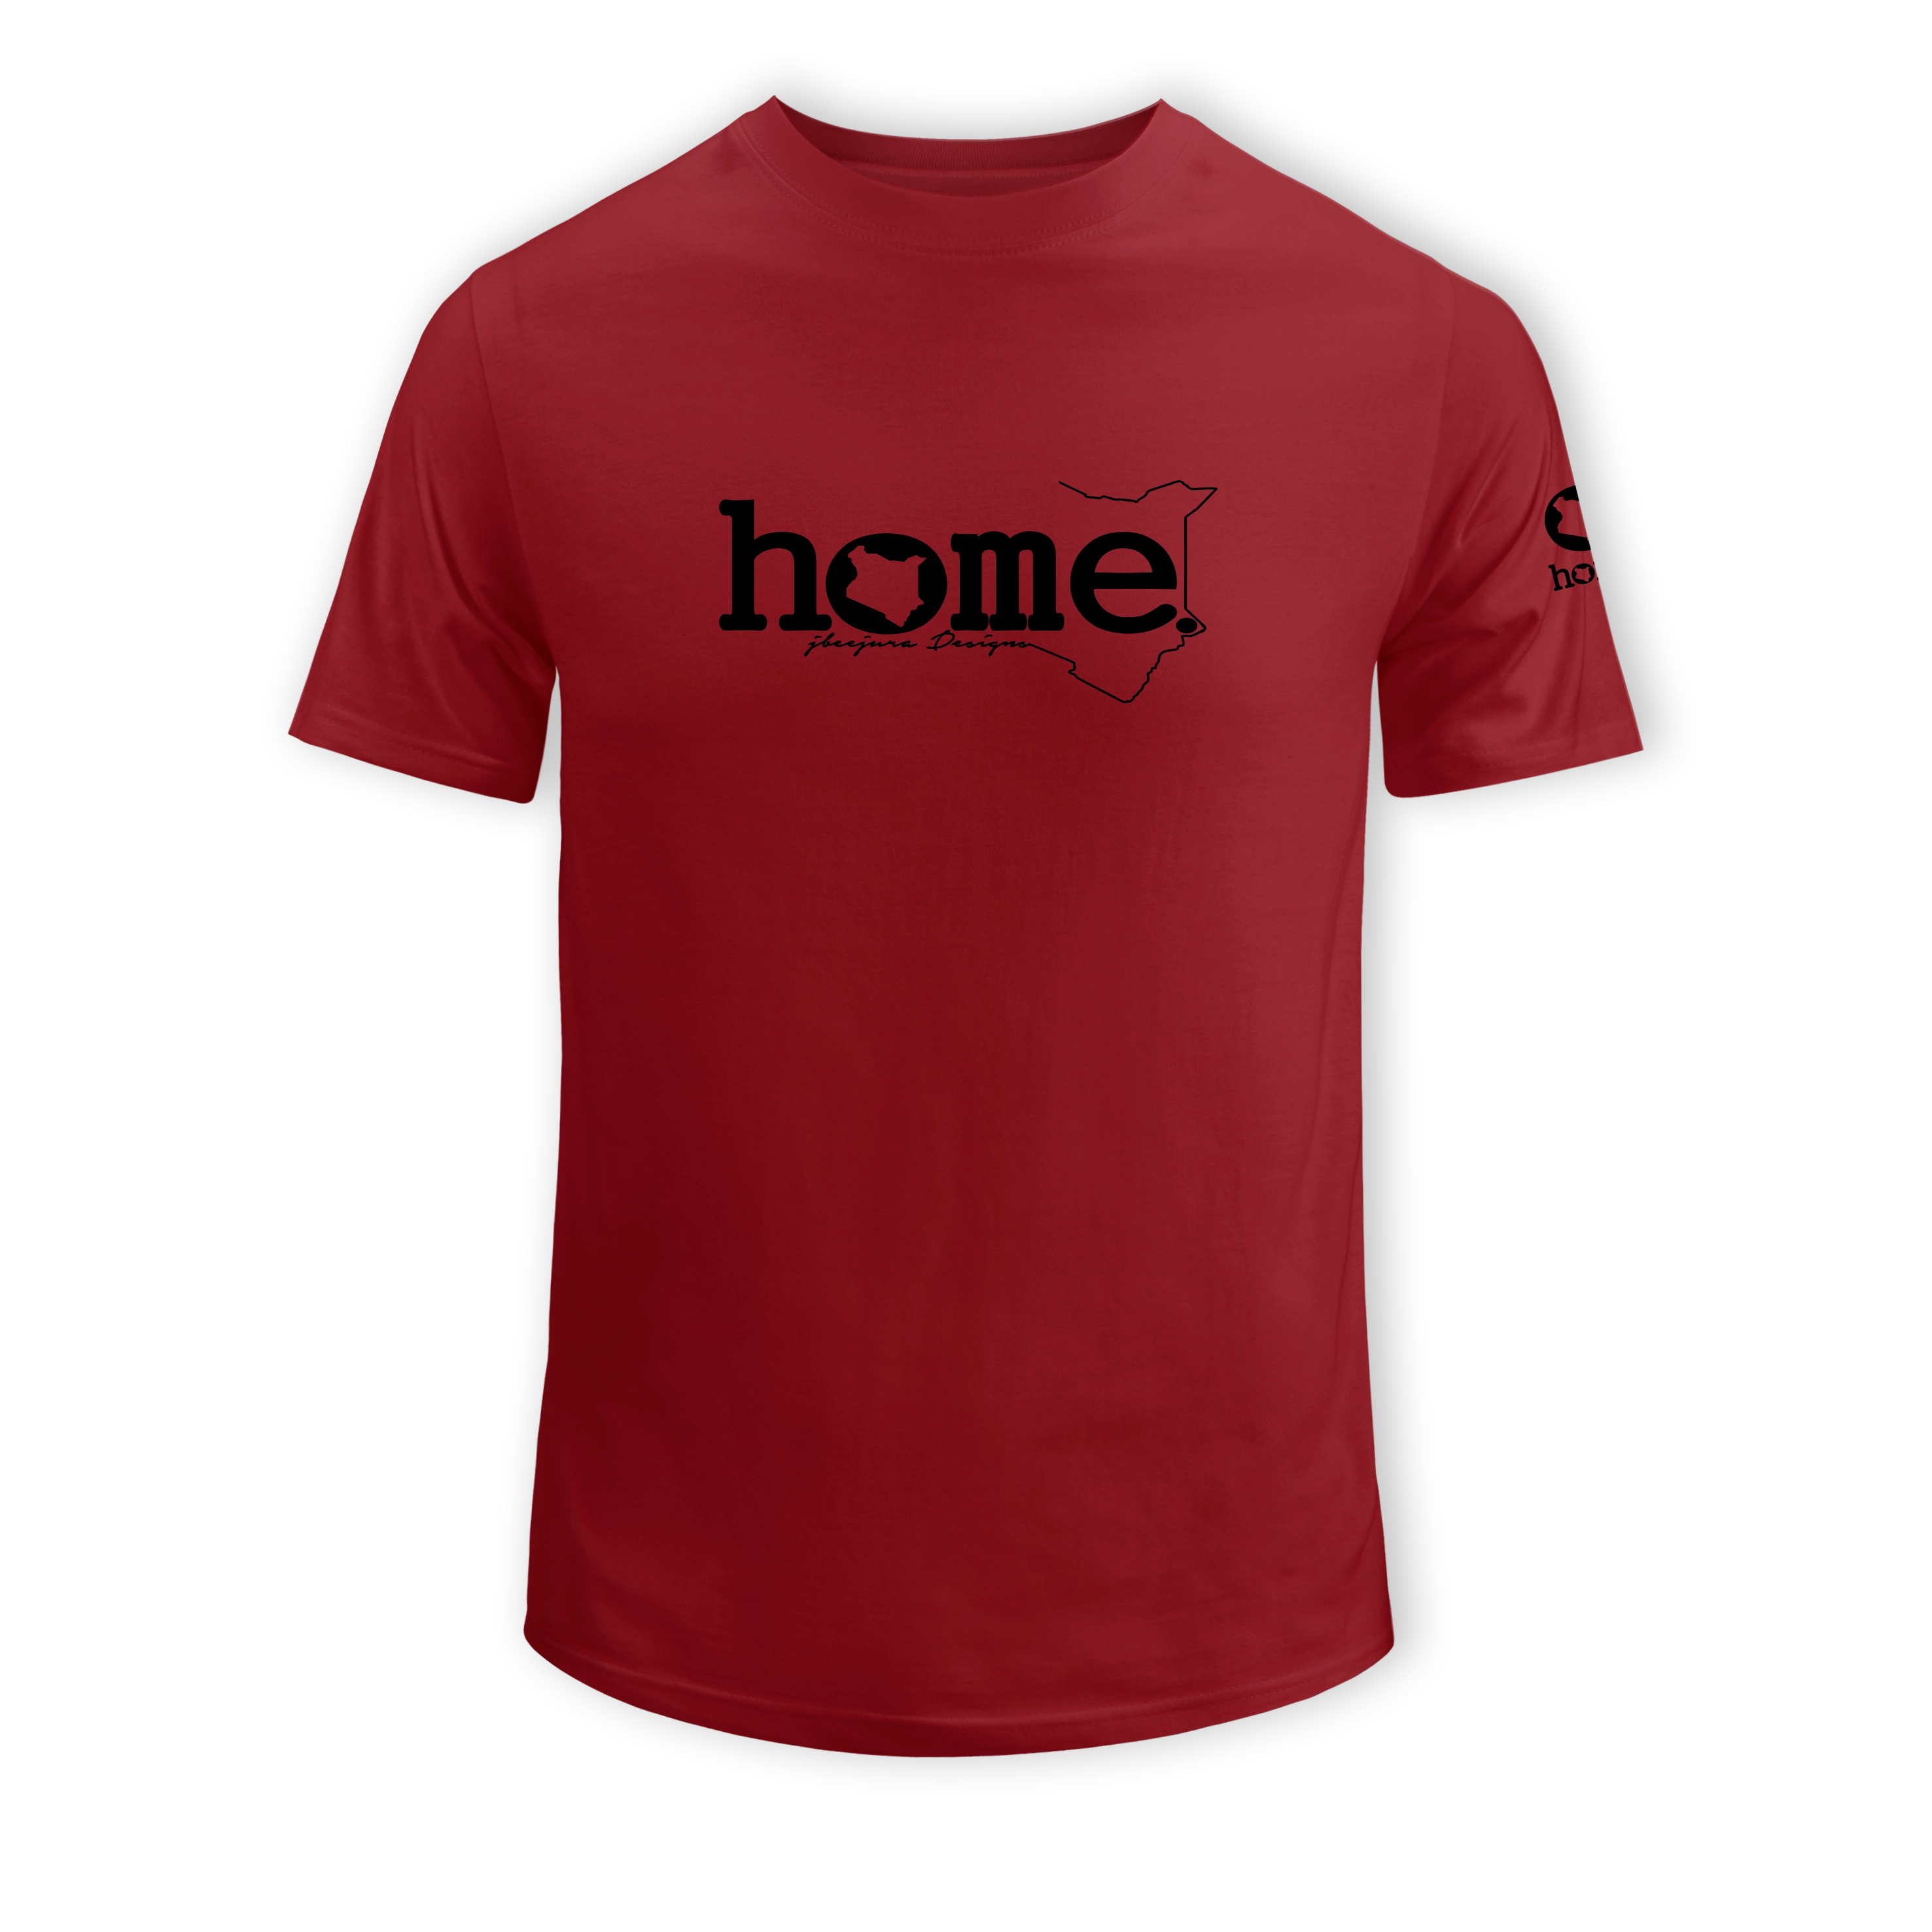 home_254 SHORT-SLEEVED MAROON RED T-SHIRT WITH A BLACK CLASSIC WORDS PRINT – COTTON PLUS FABRIC